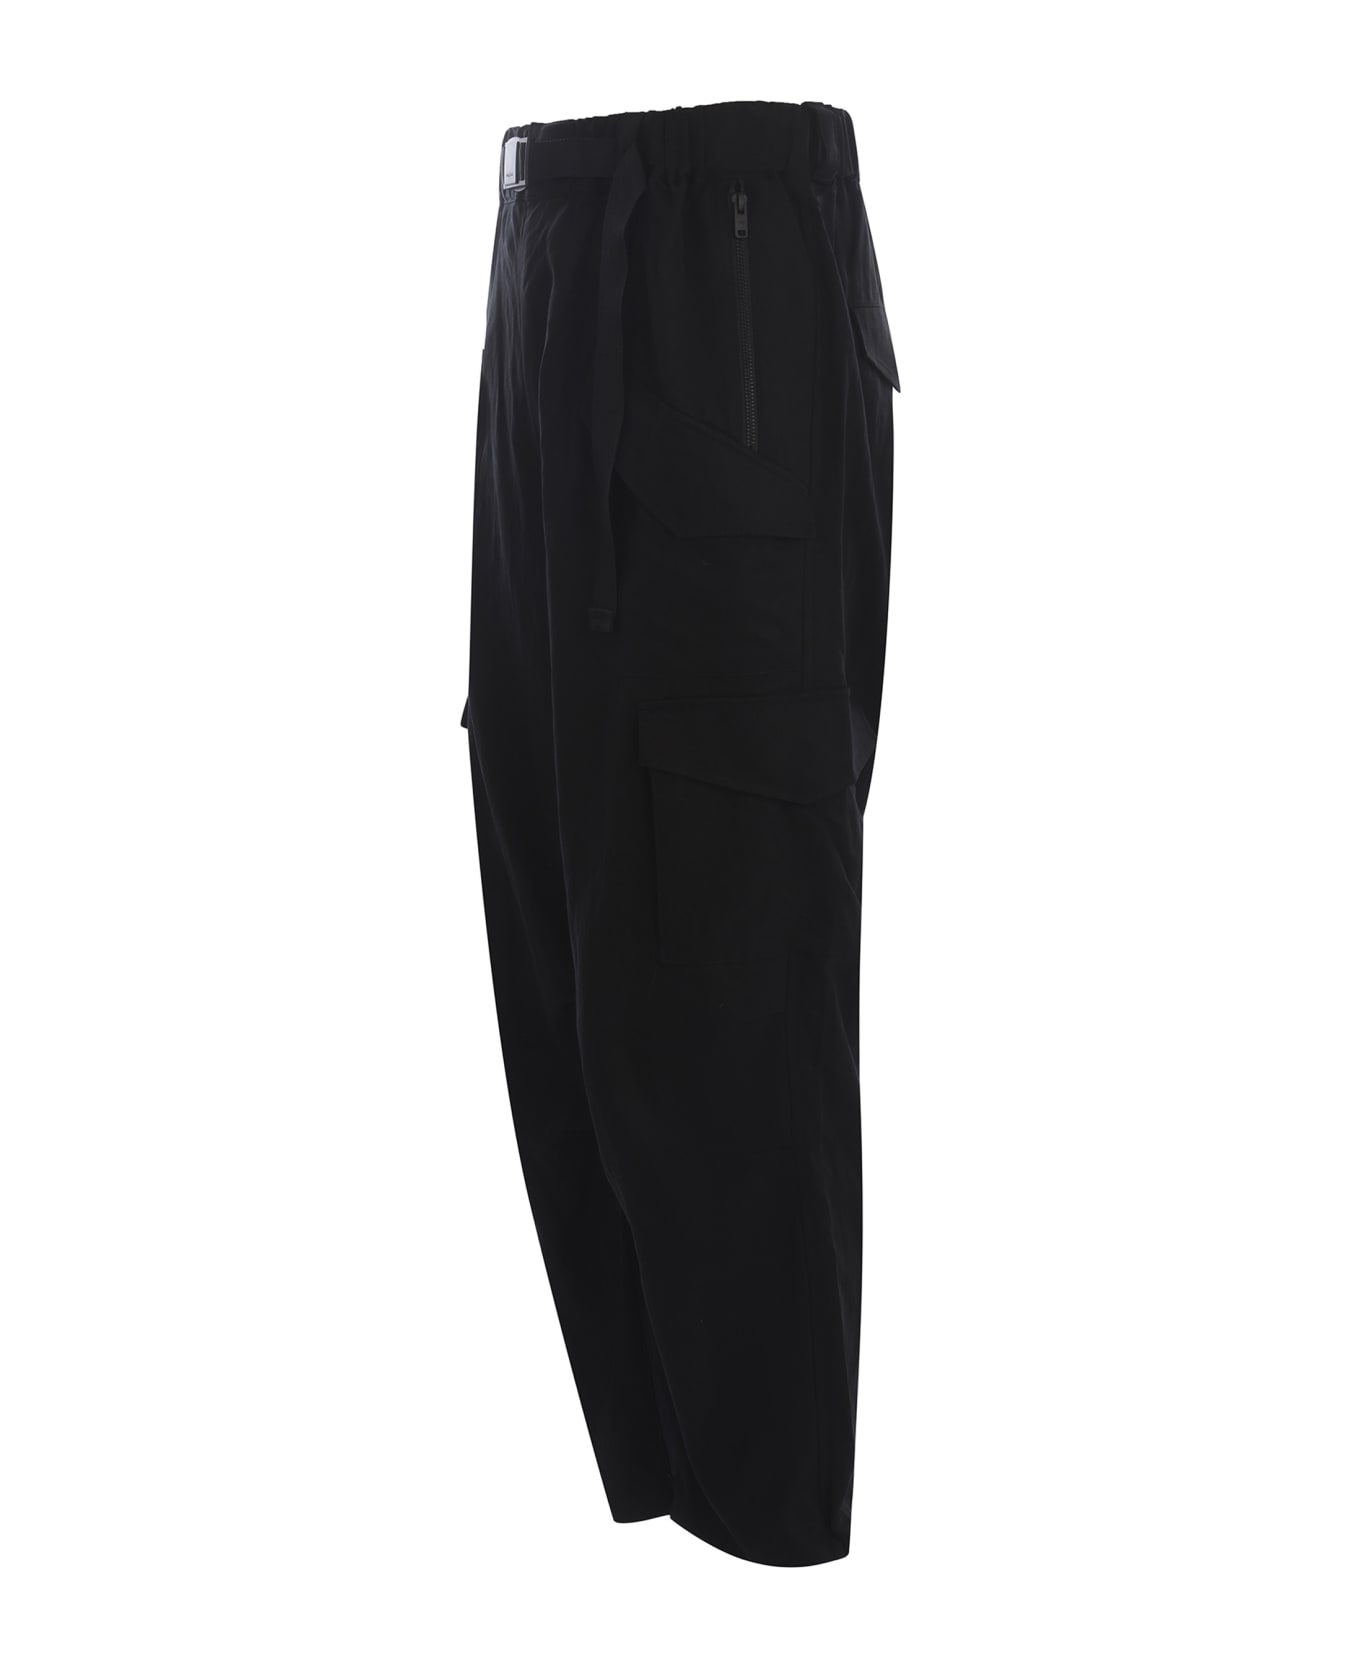 Y-3 Trousers Y-3 "wash" Made Of Nylon - Nero ボトムス